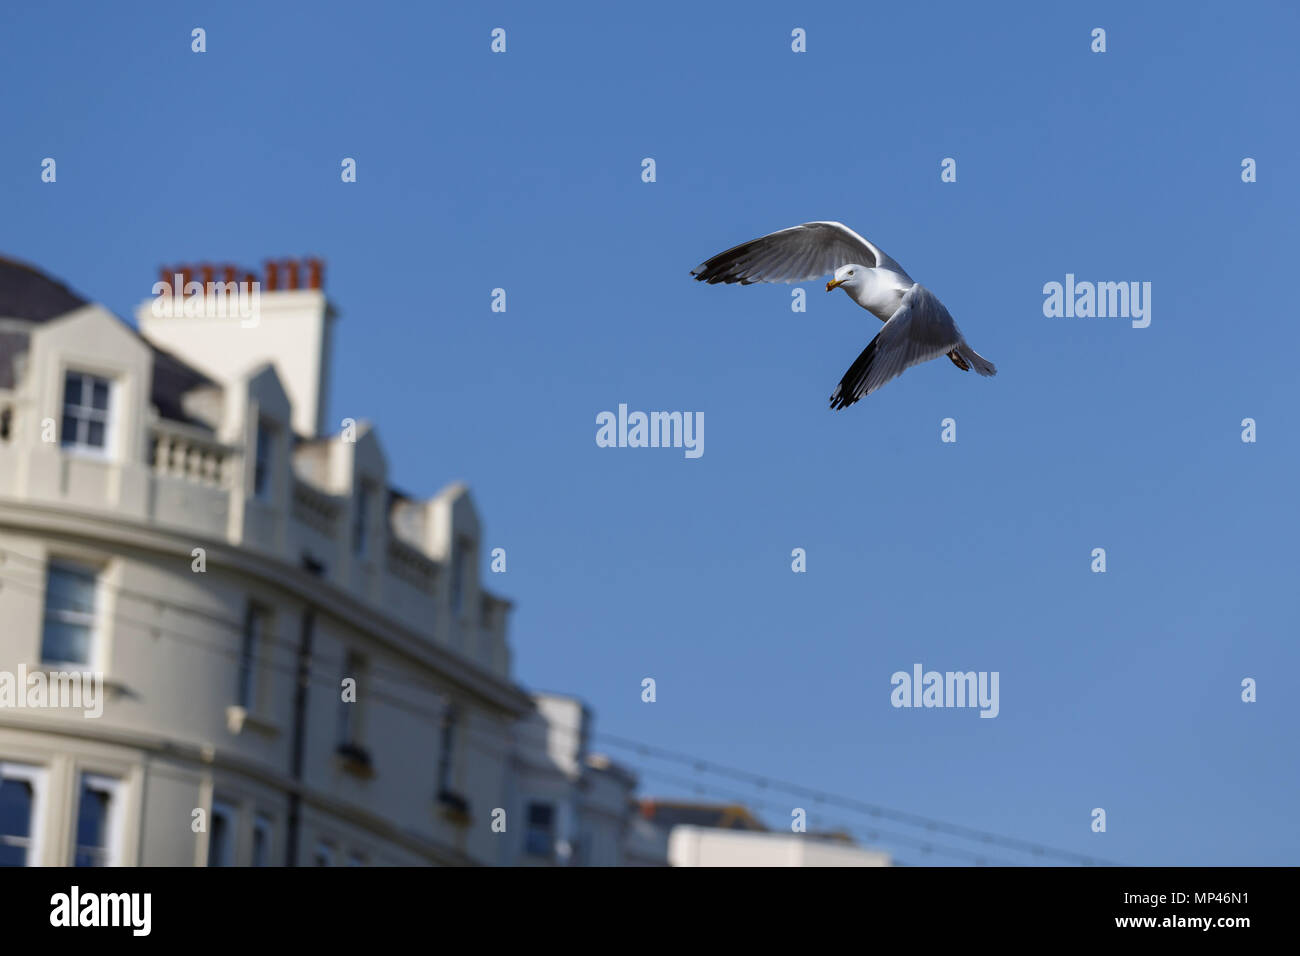 A seagull in flight in front of a blue sky. Brighton, East Sussex, UK. Stock Photo